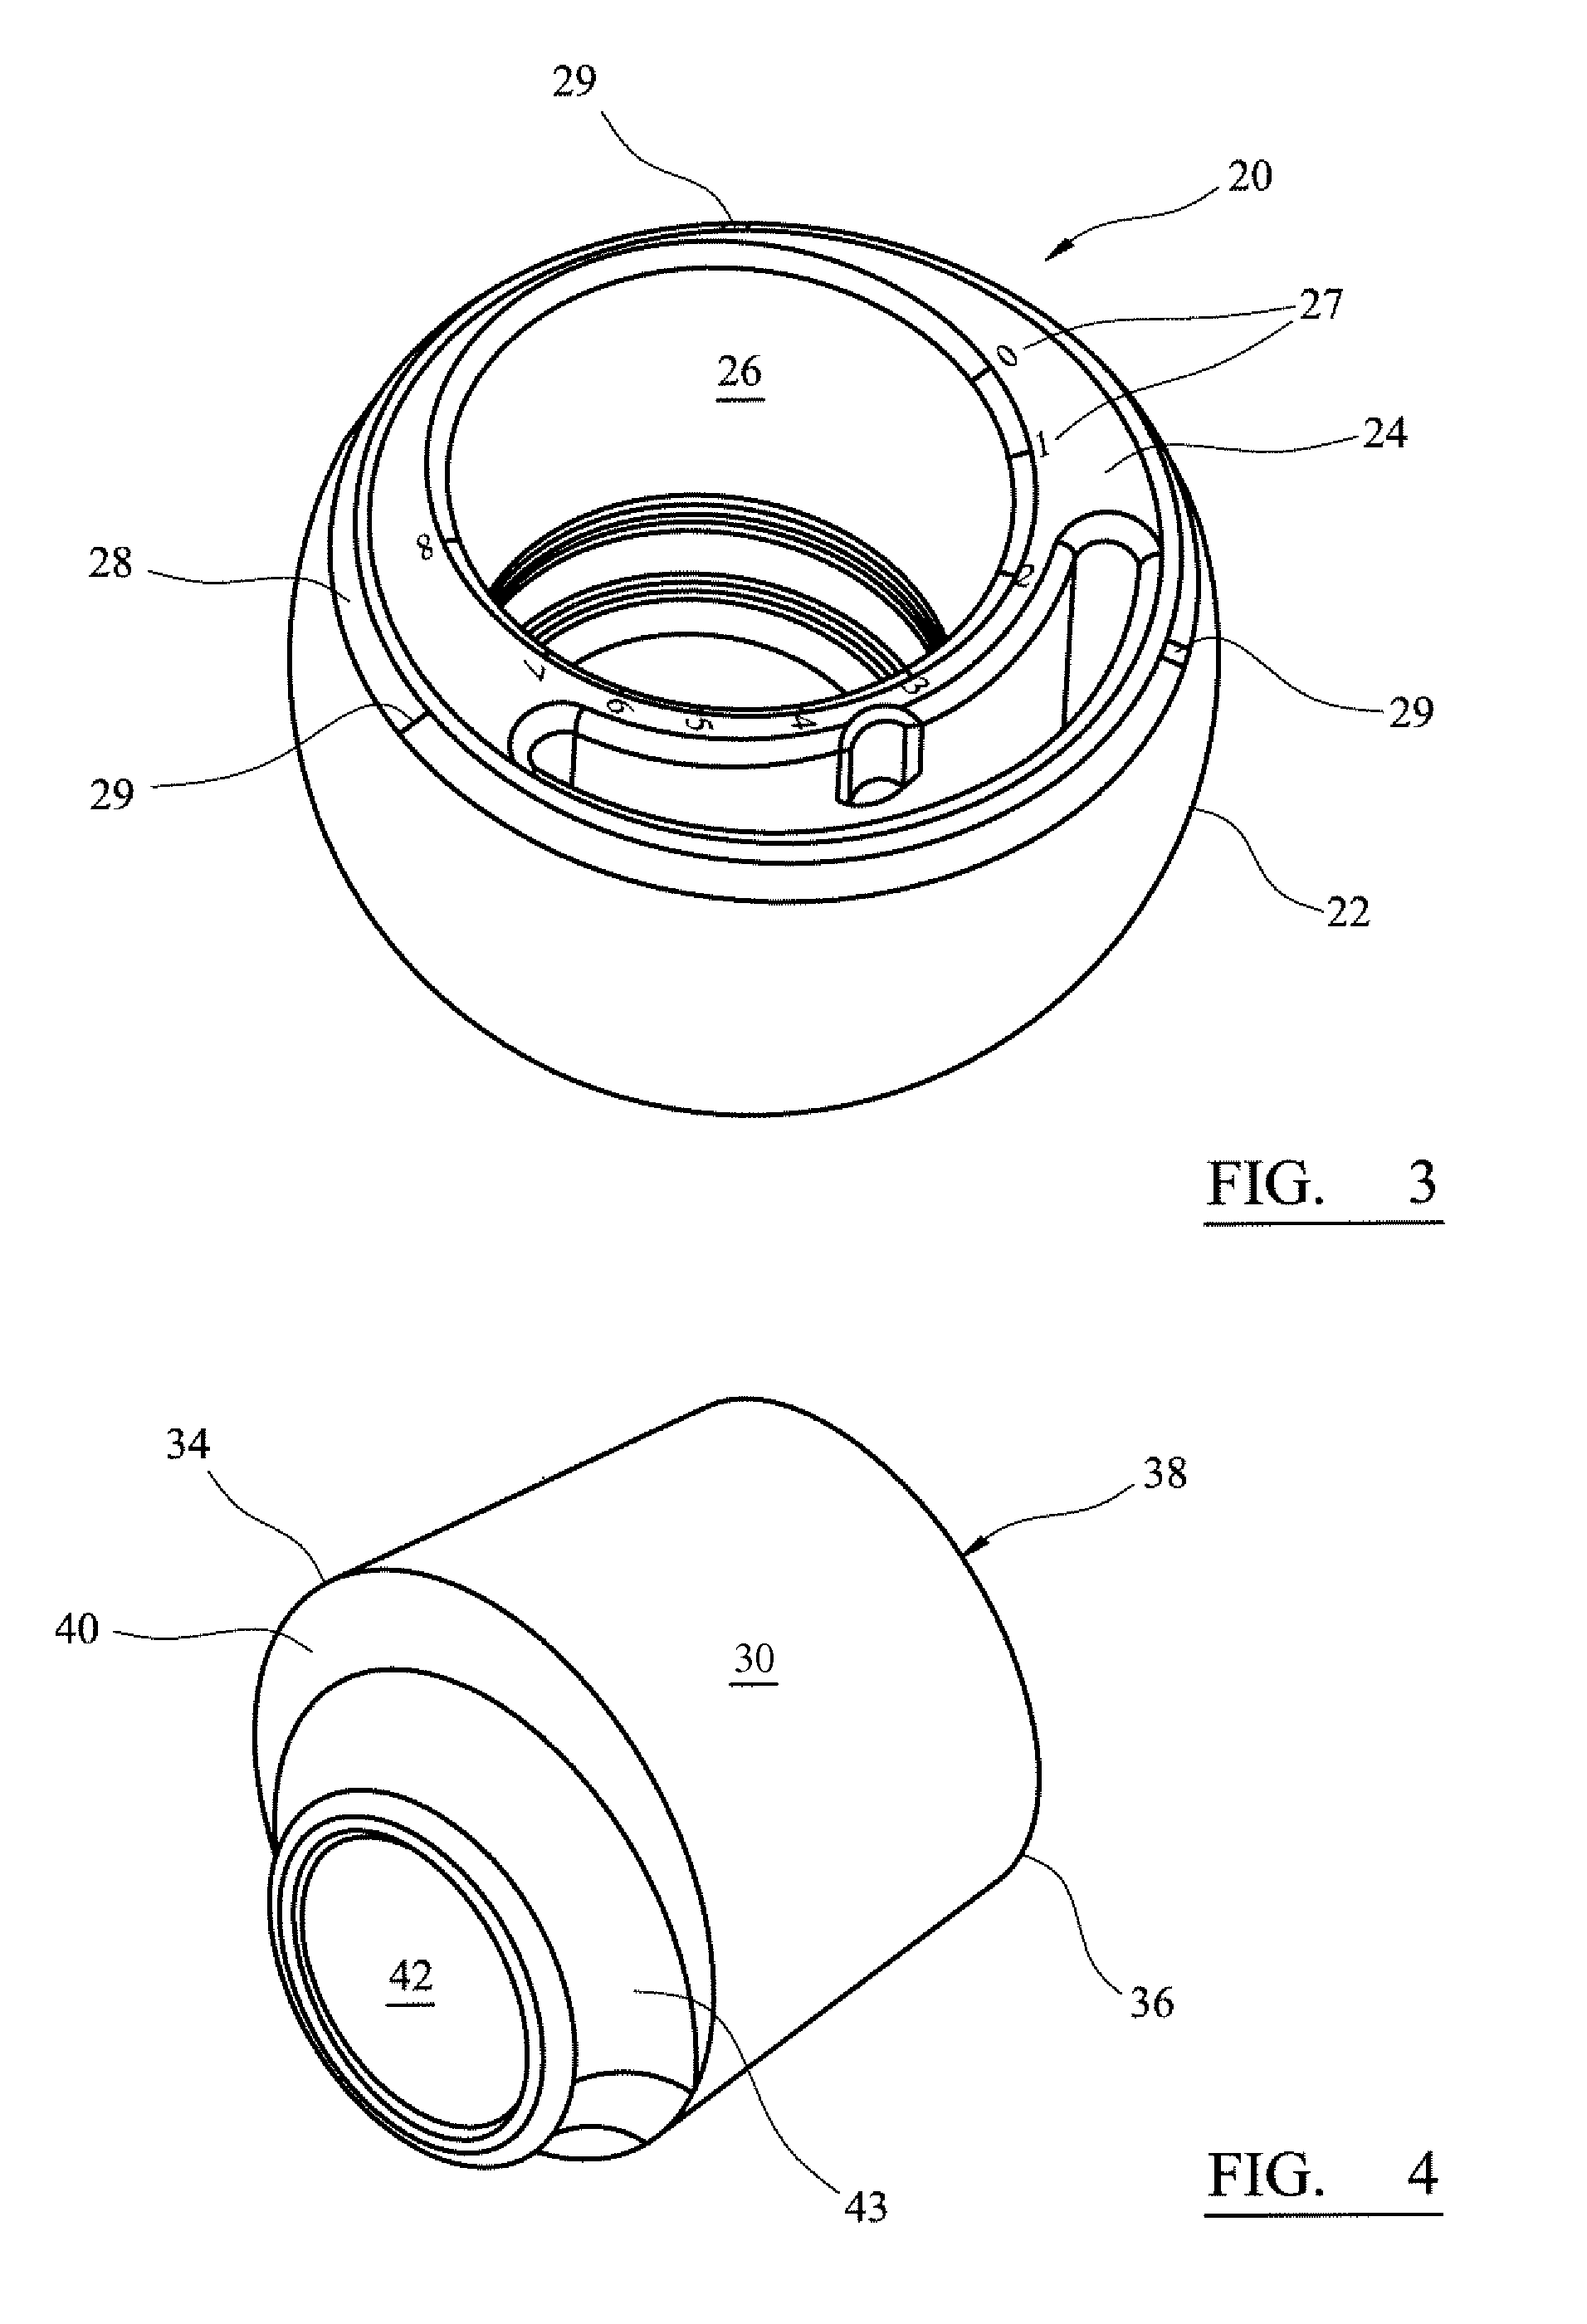 Instrument for use in a joint replacement procedure